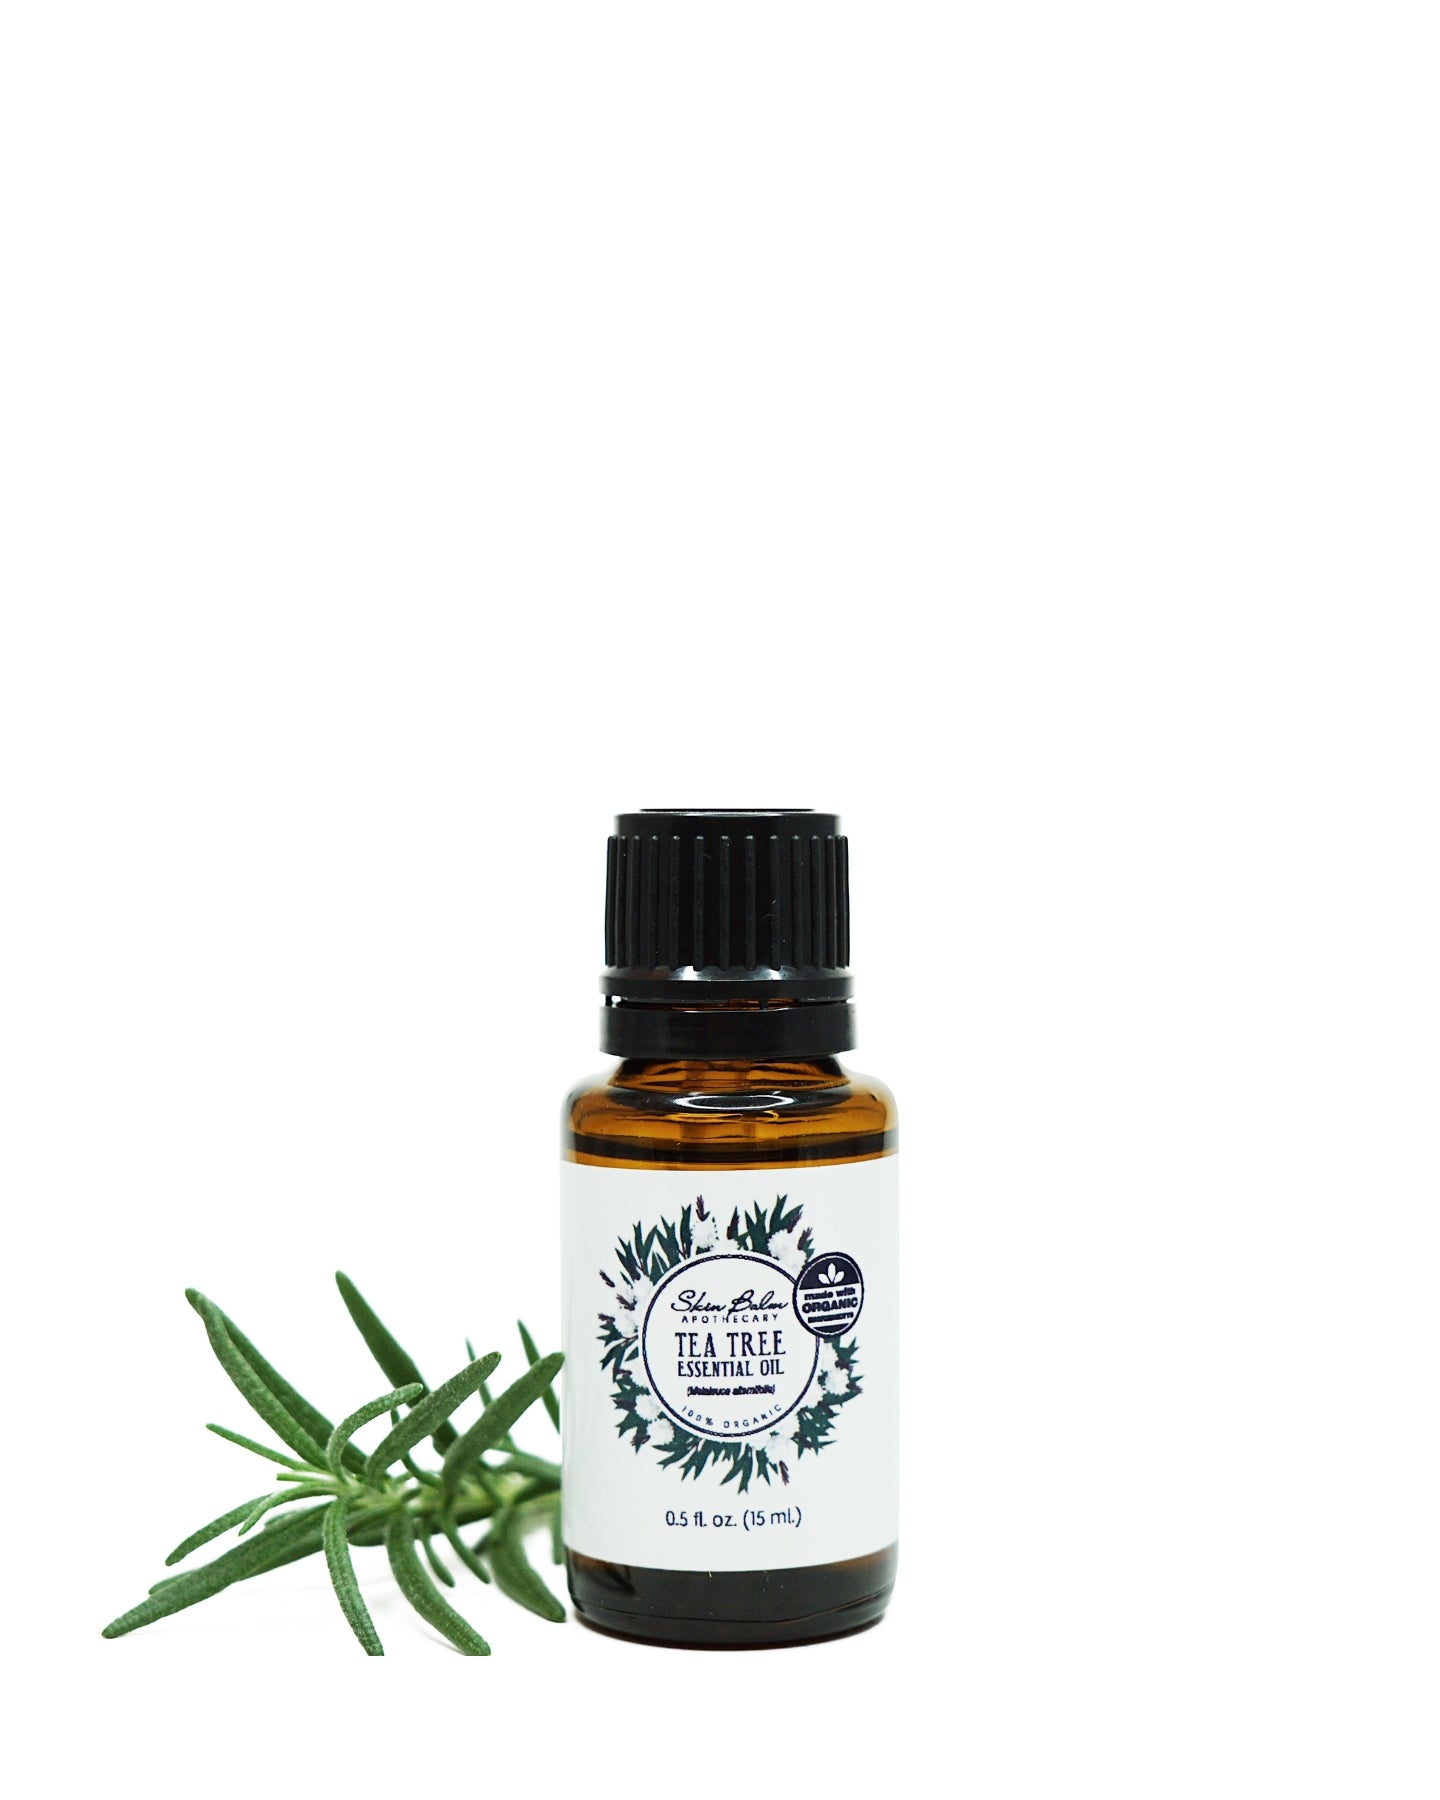 Organic Tea Tree Essential Oil with green foliage against a white background.